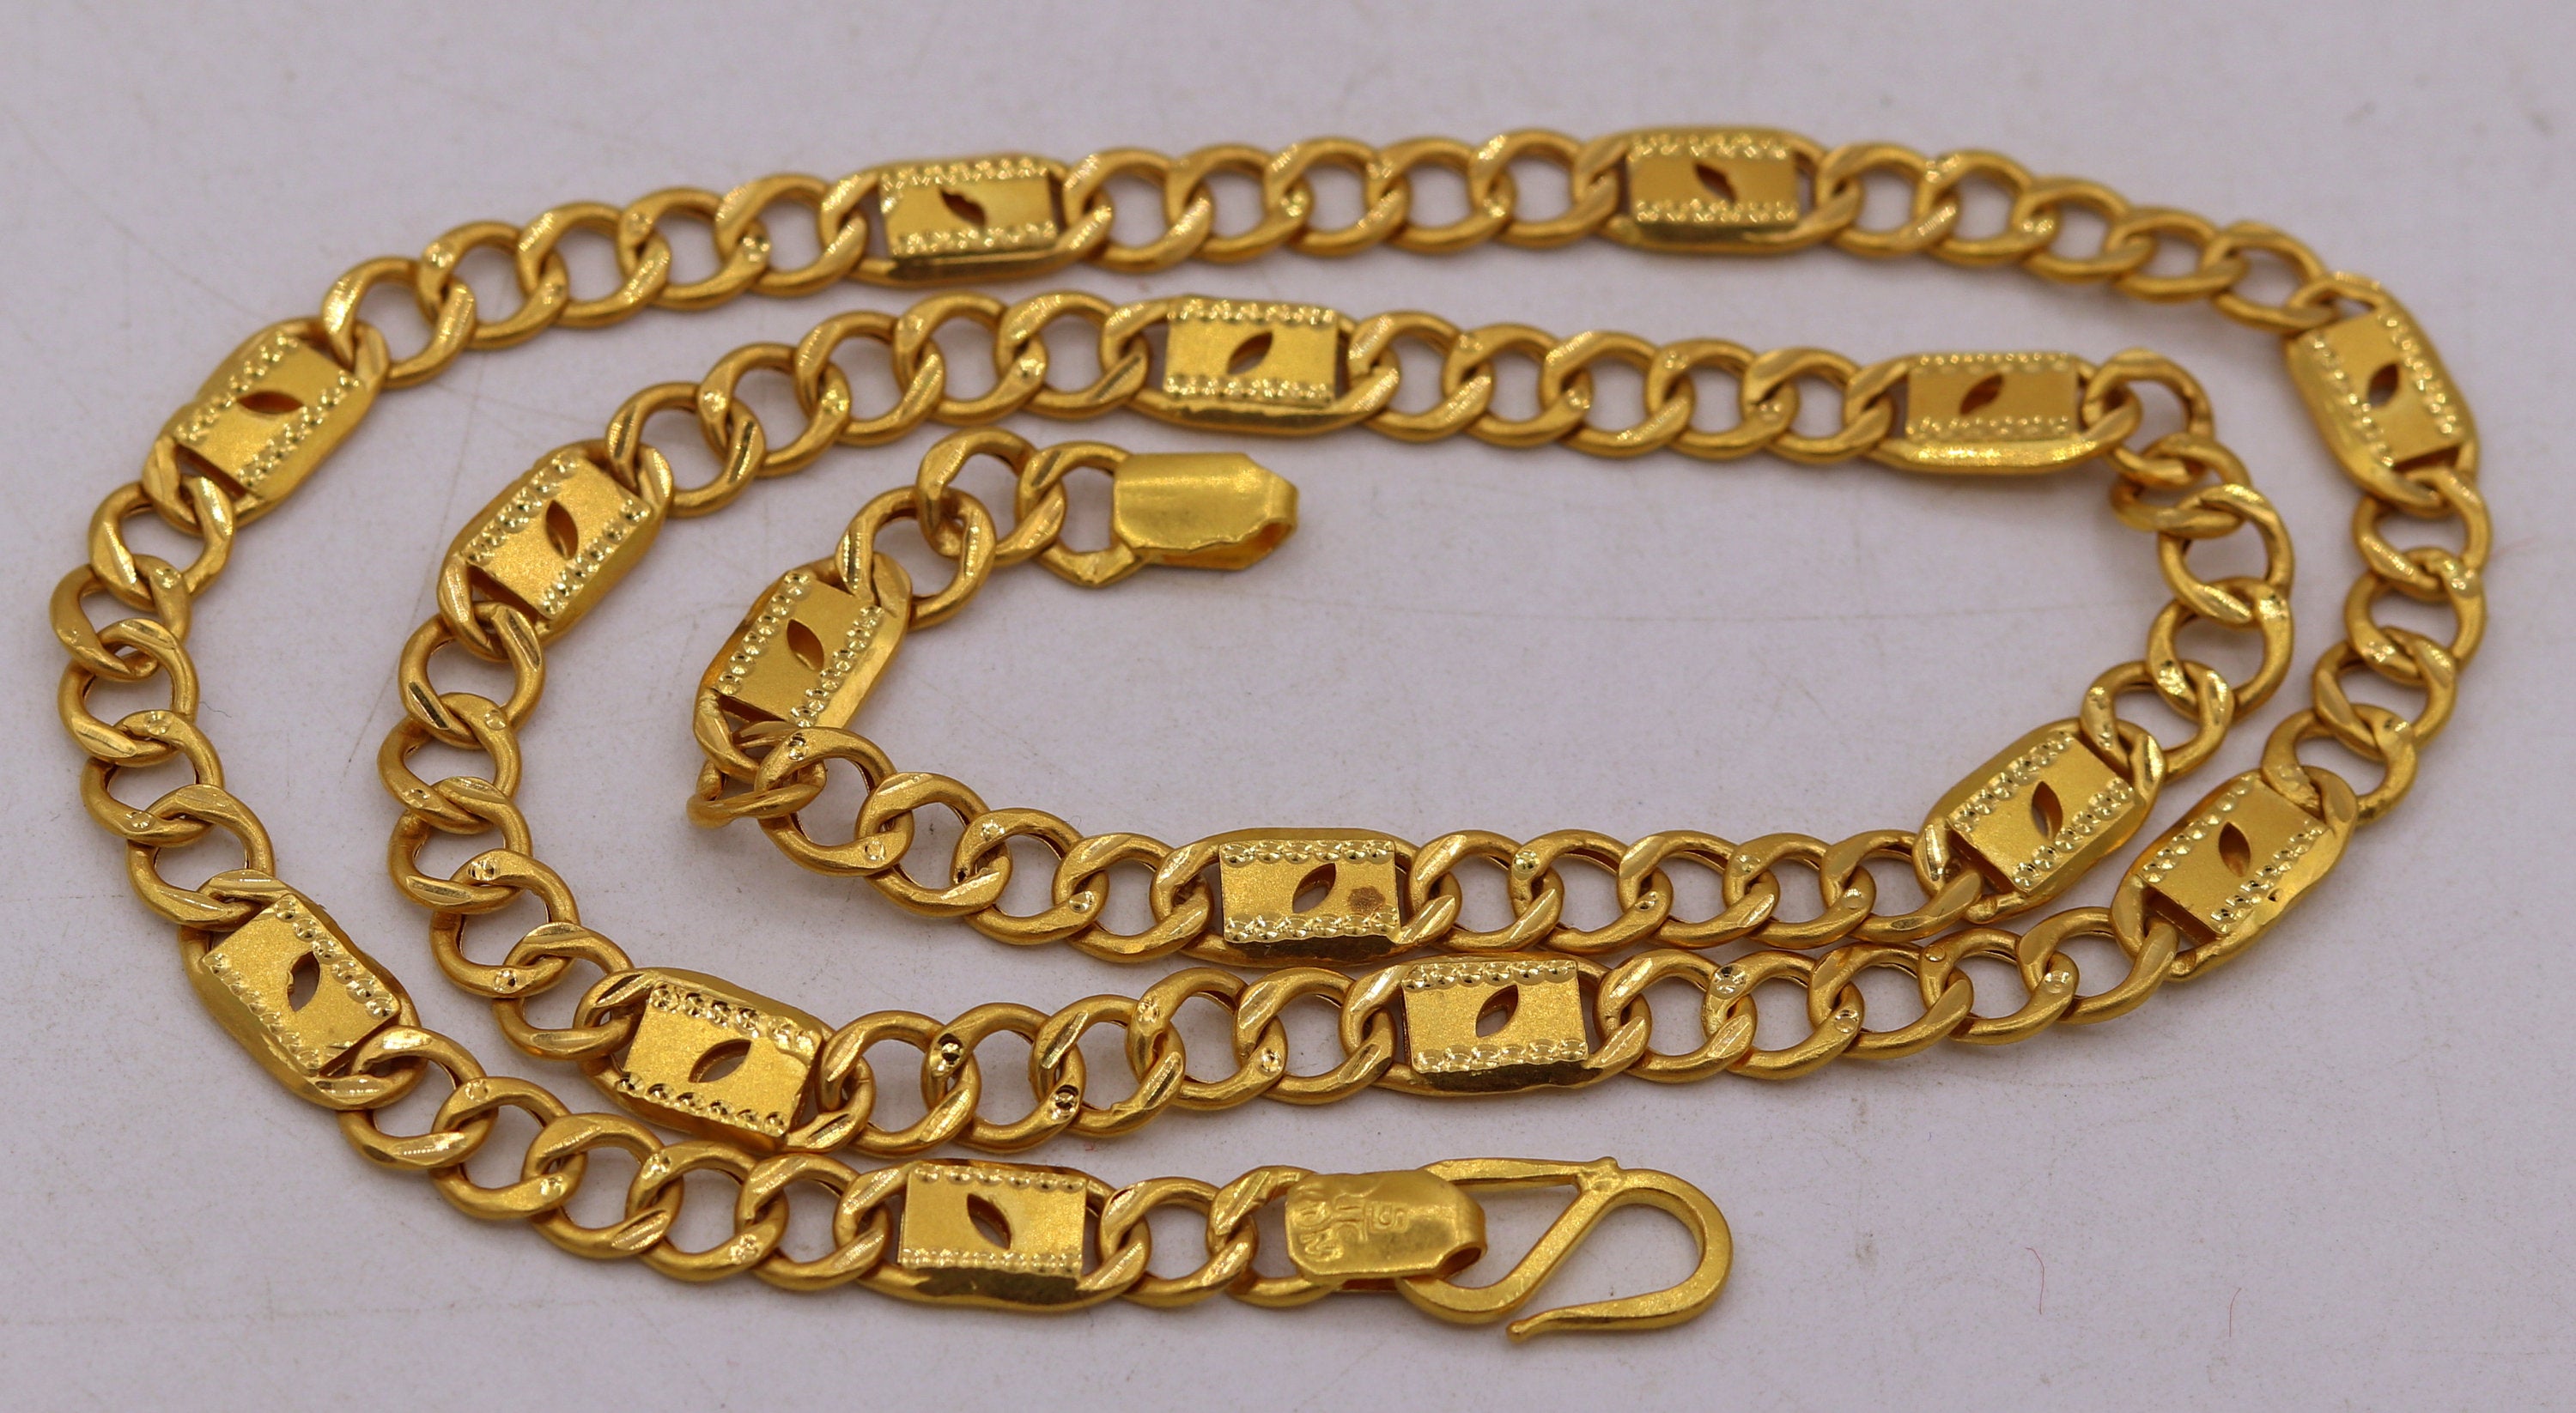 Nawabi Chains And Bracelets at Best Price in Ahmedabad | Master Chains